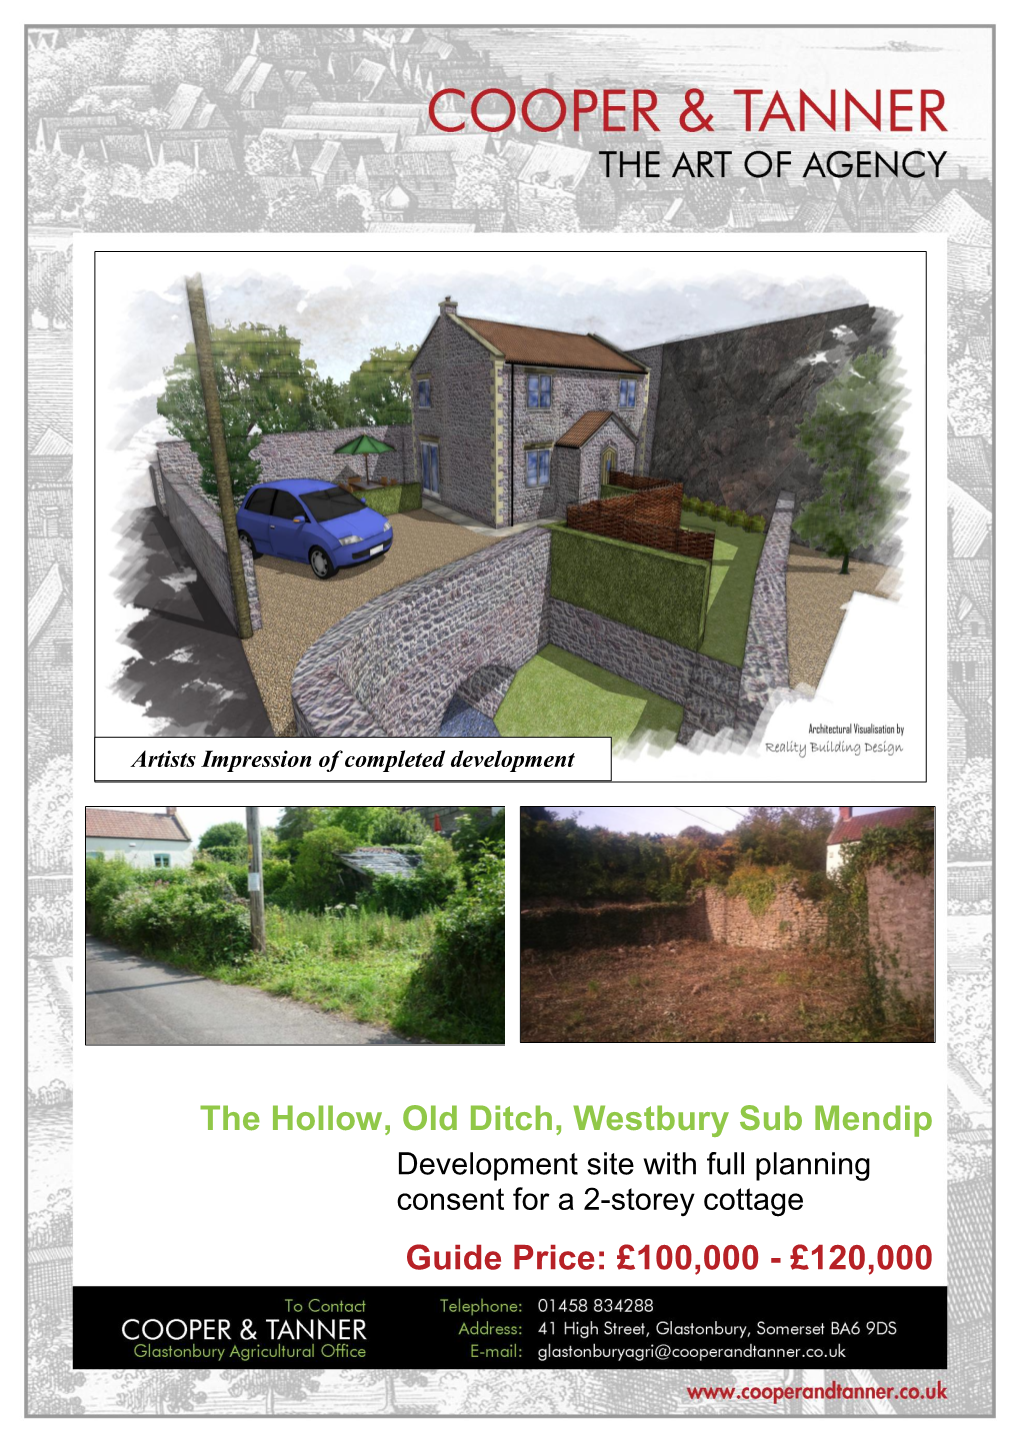 The Hollow, Old Ditch, Westbury Sub Mendip Guide Price